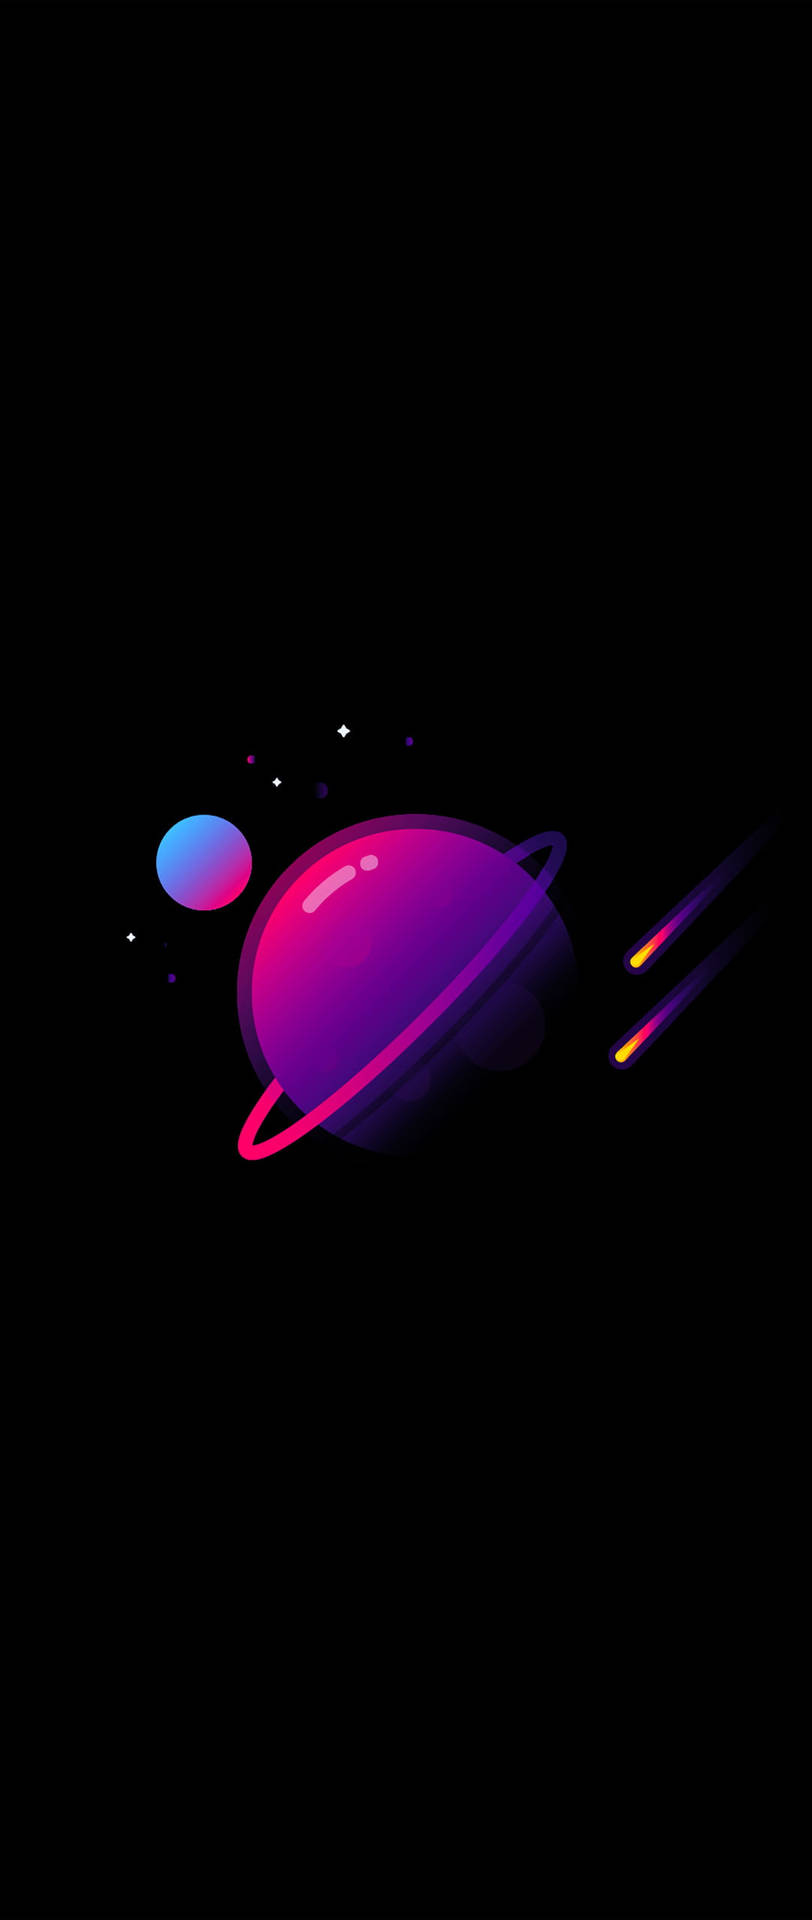 Caption: Planets Align - Oled Phone Wallpaper Background